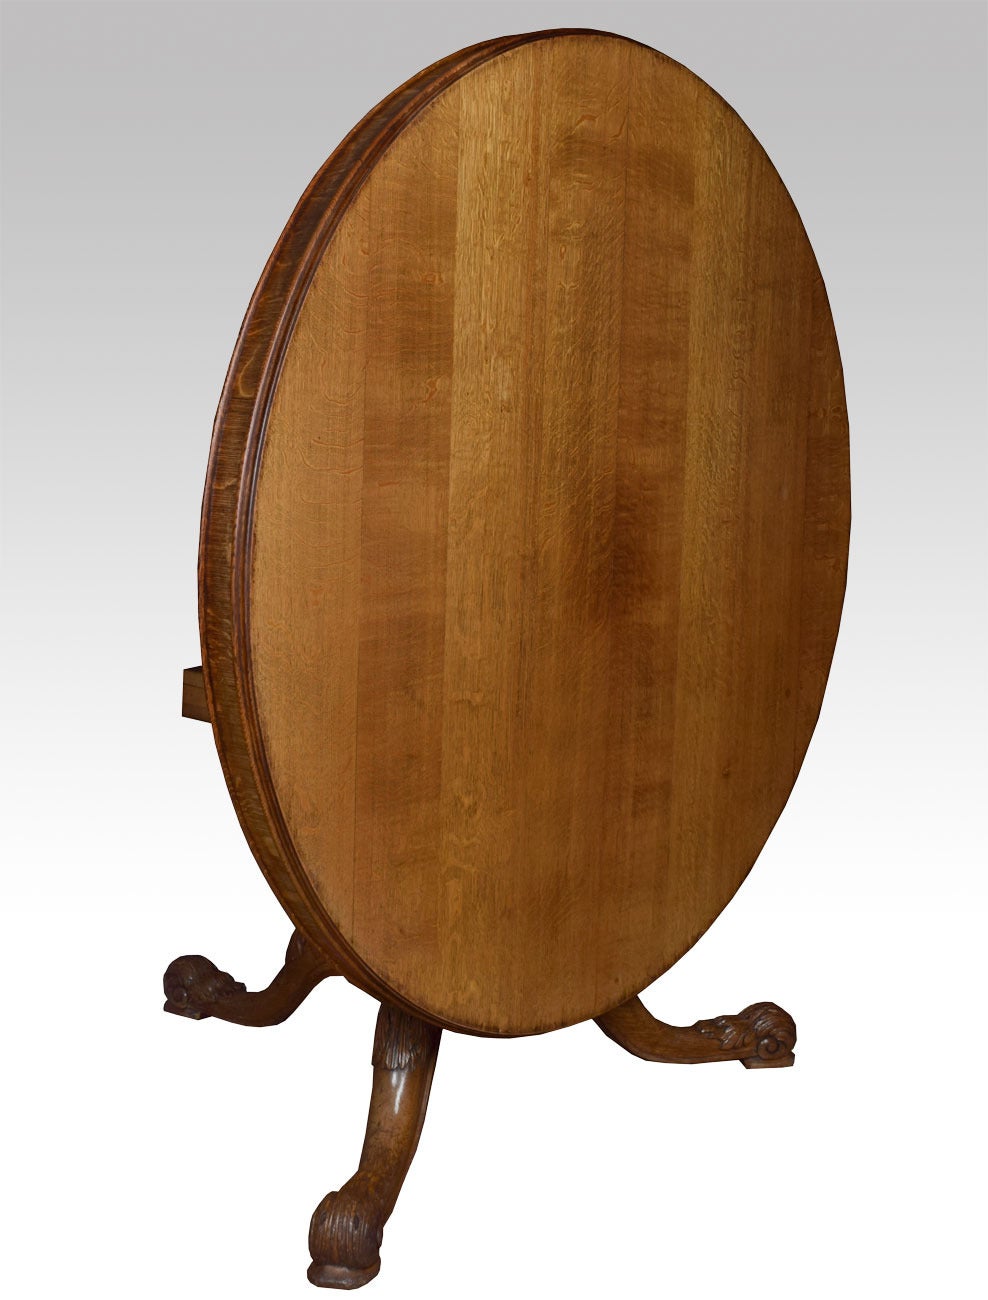 Oak round dining or center table, the circular top above pedestal base with gothic carved panels all raised up on acanthus scroll legs terminating in brass castors. Stamped Gillows Lancaster.

Dimensions: Height 29
Diameter 56.5 Inches